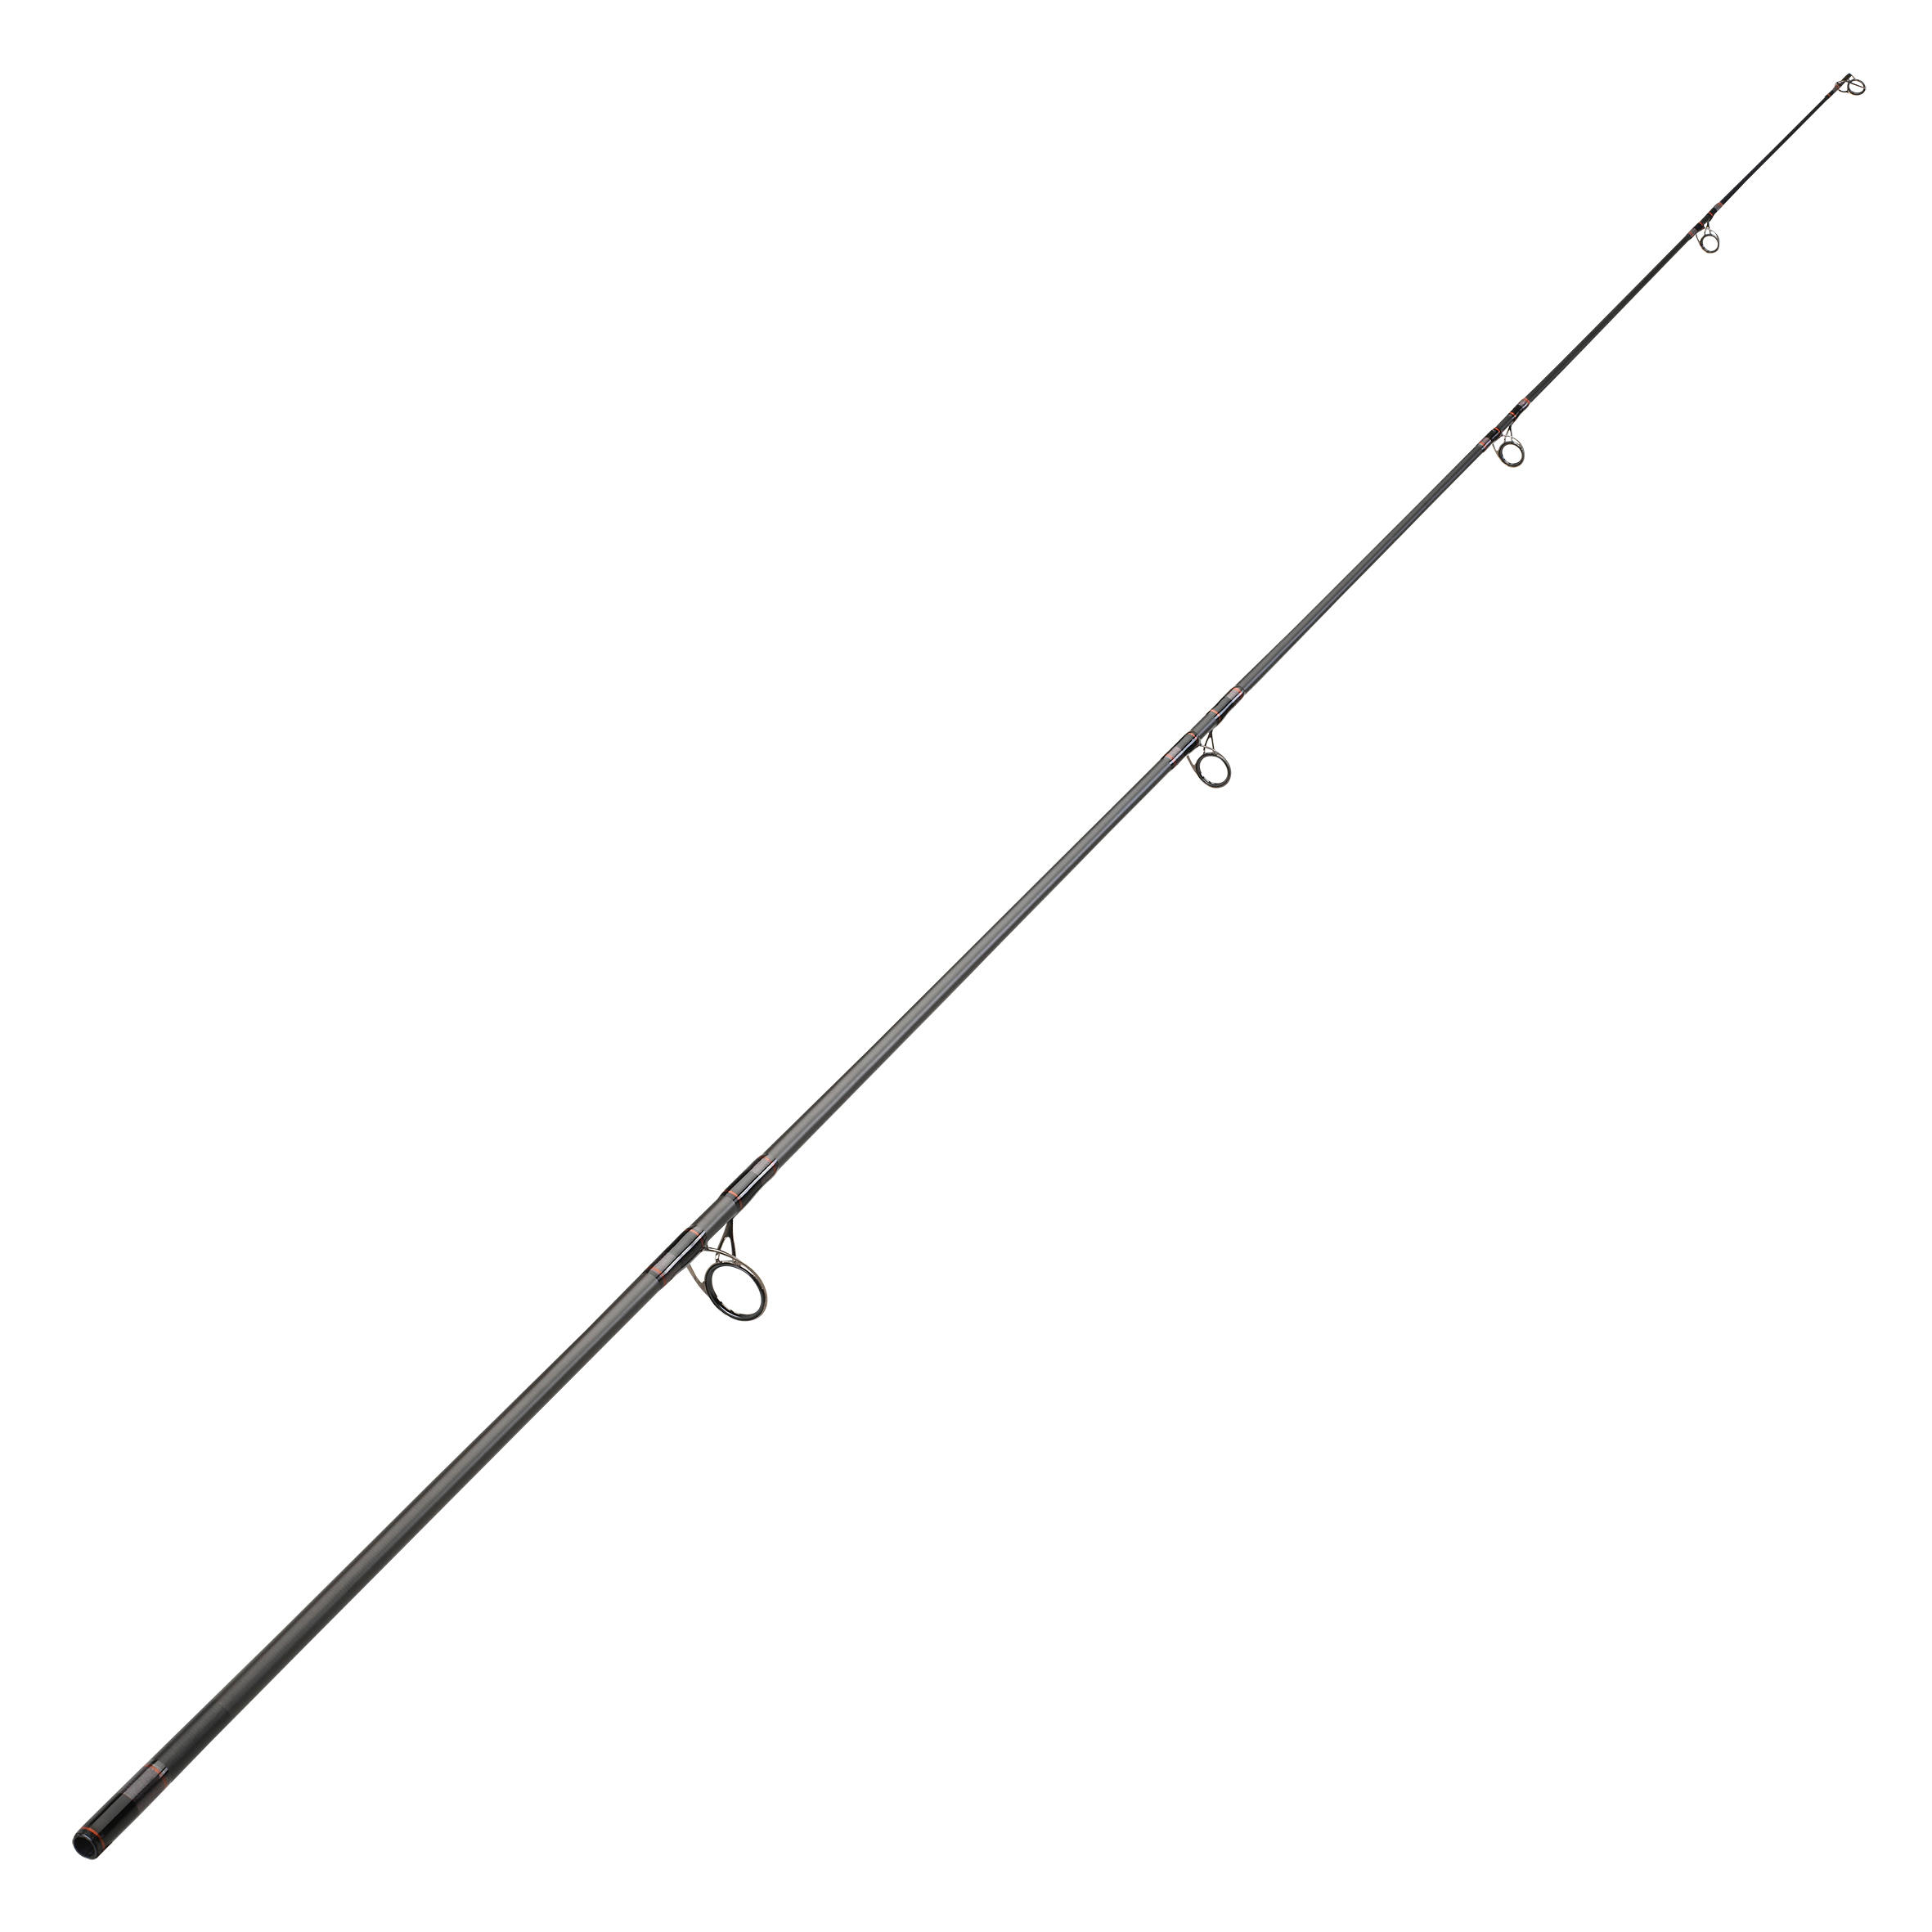 CAPERLAN Replacement tip for the Xtrem 9 360cm rod (12 feet) for carp fishing.